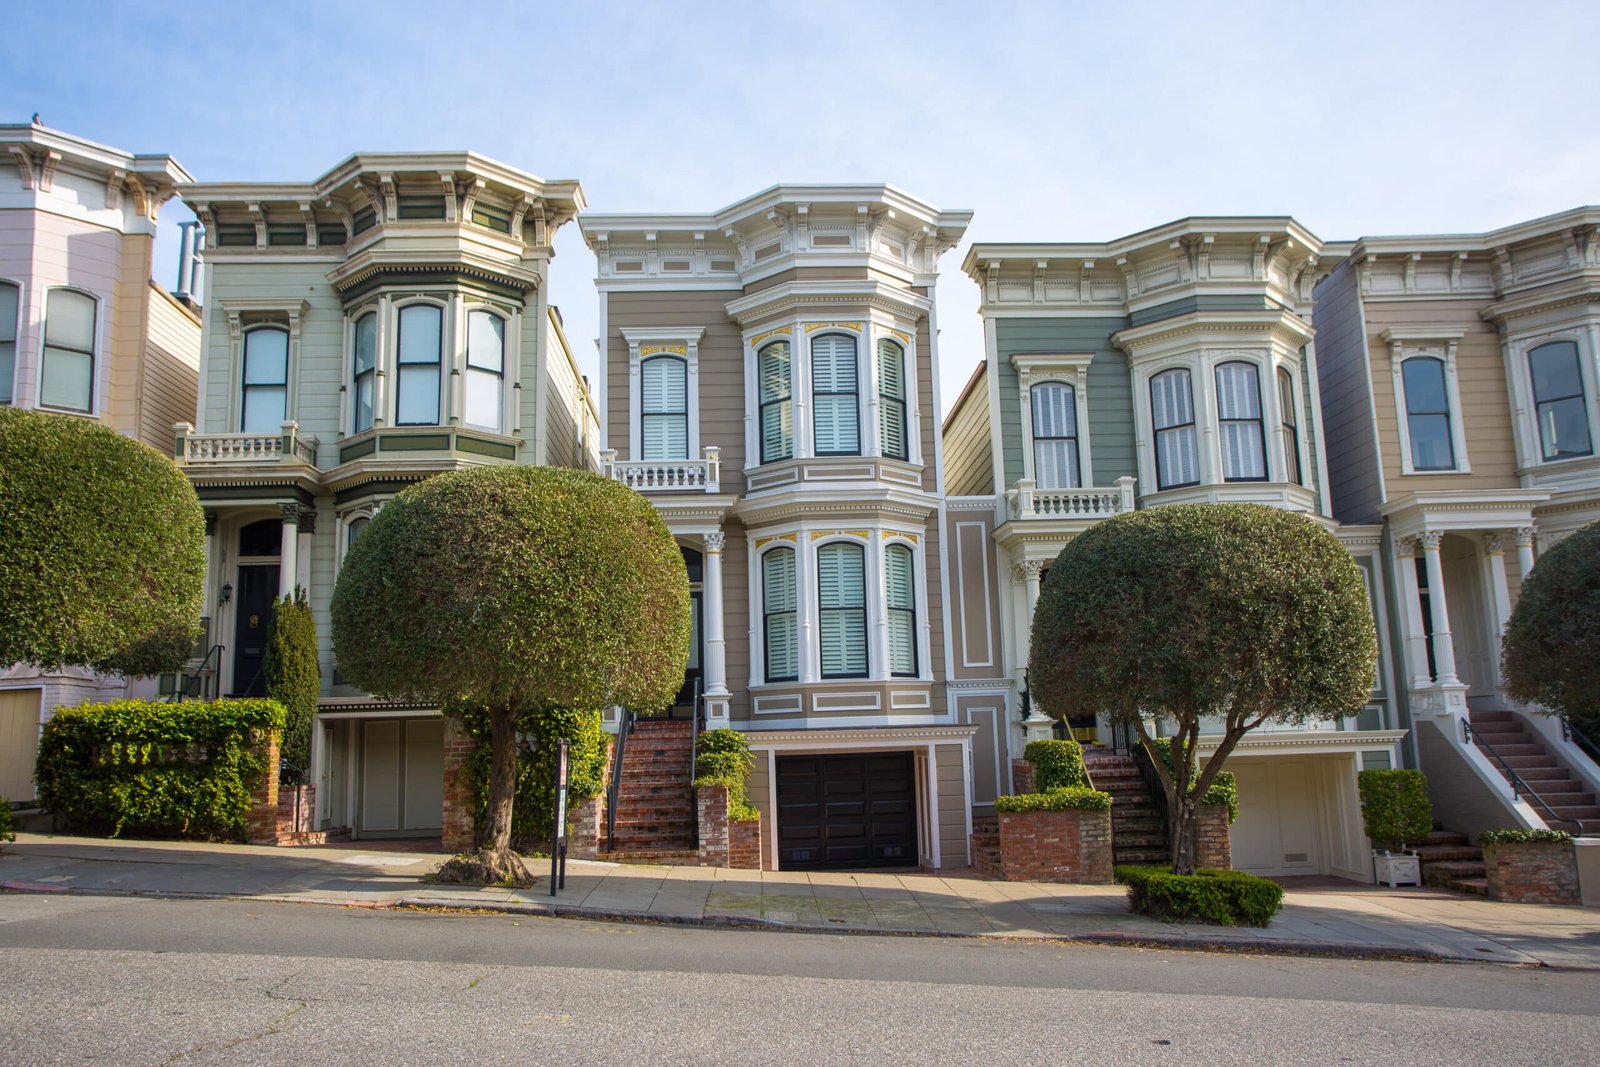 Victorian Houses In San Francisco With Bay Windows